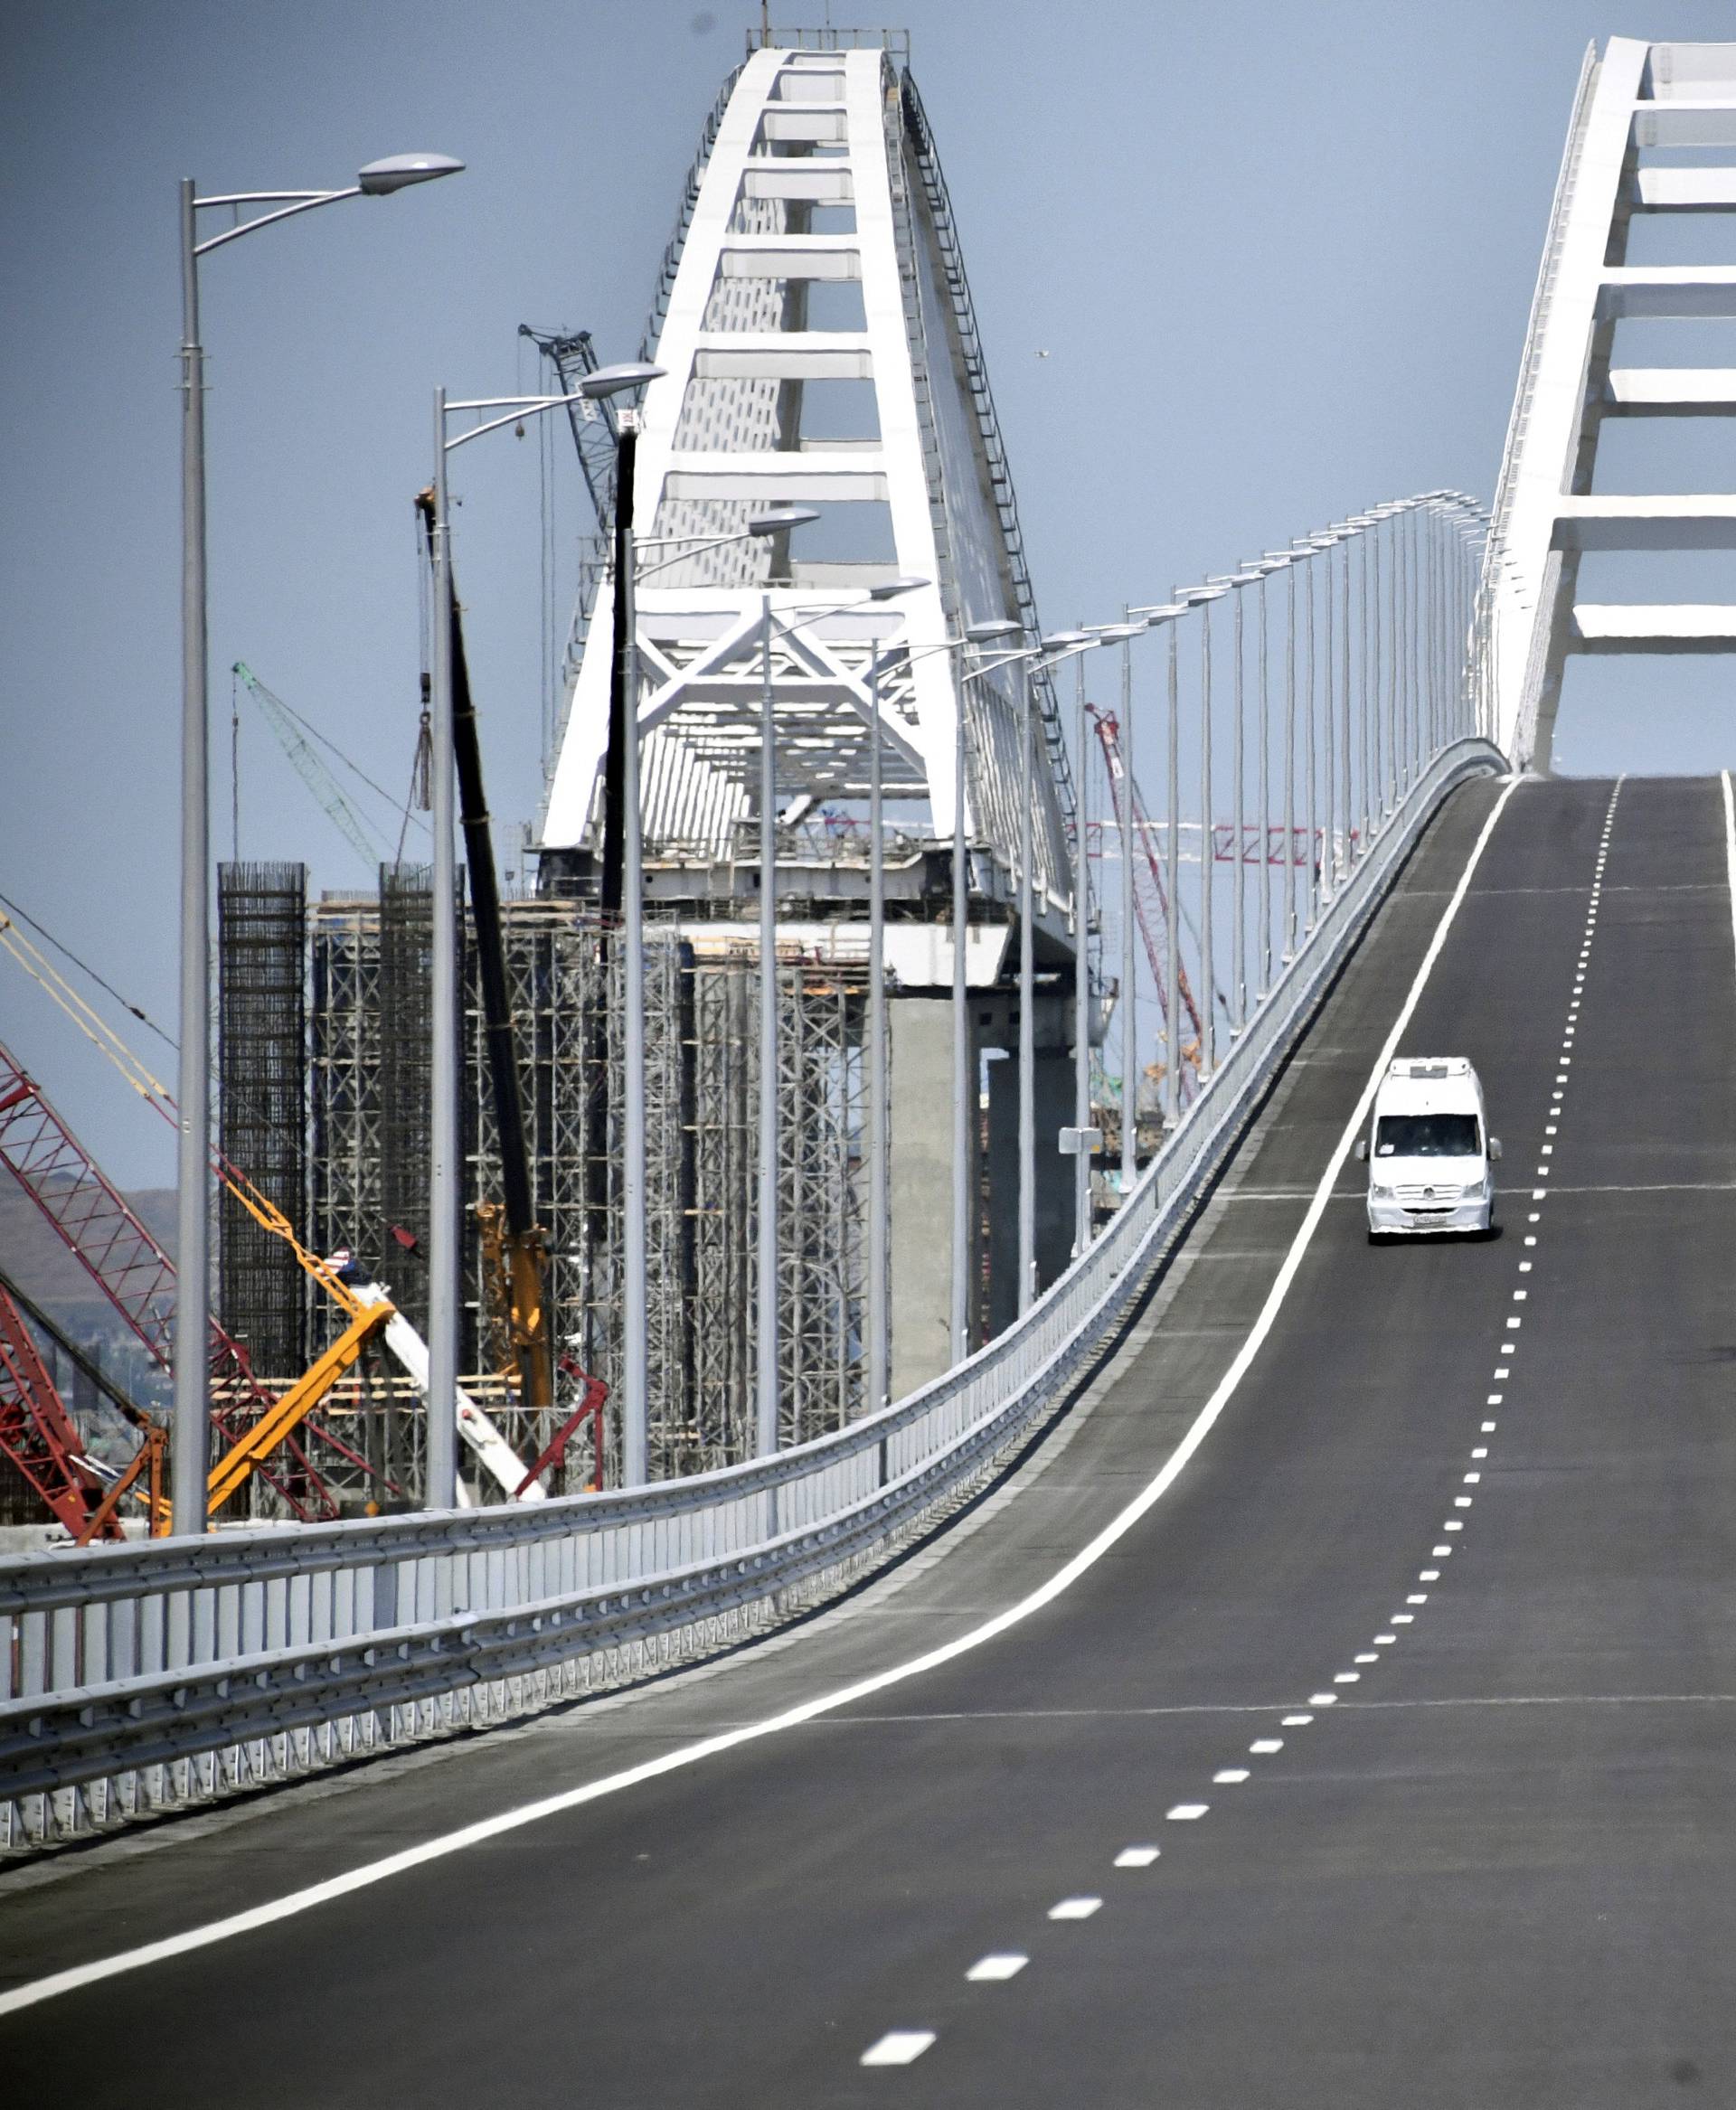 A vehicle drives along a bridge, which was constructed to connect the Russian mainland with the Crimean Peninsula across the Kerch Strait